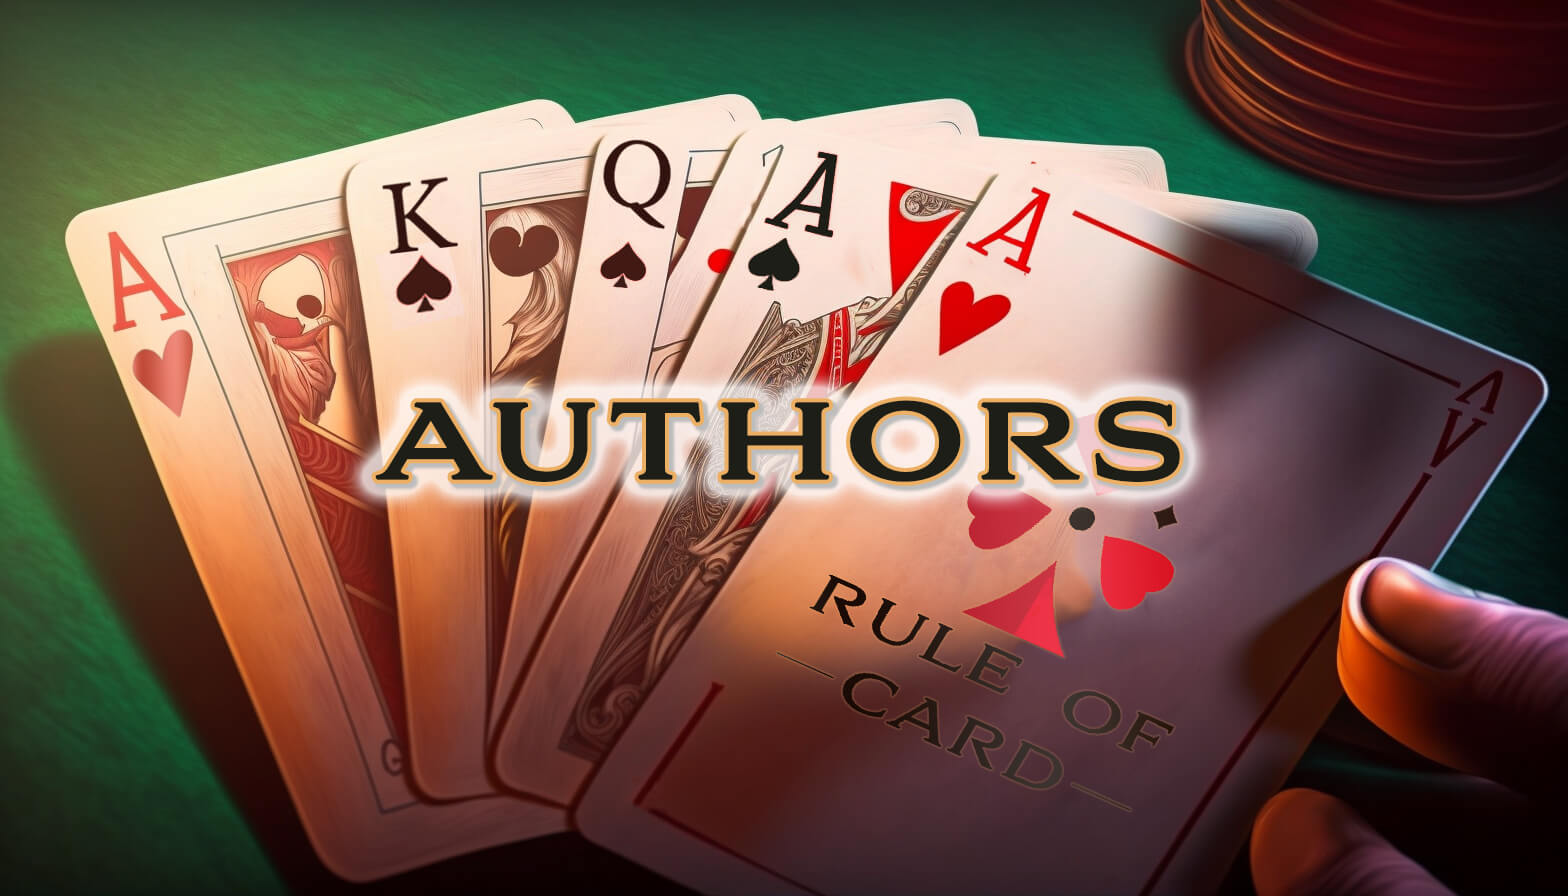 Playing the card game Authors